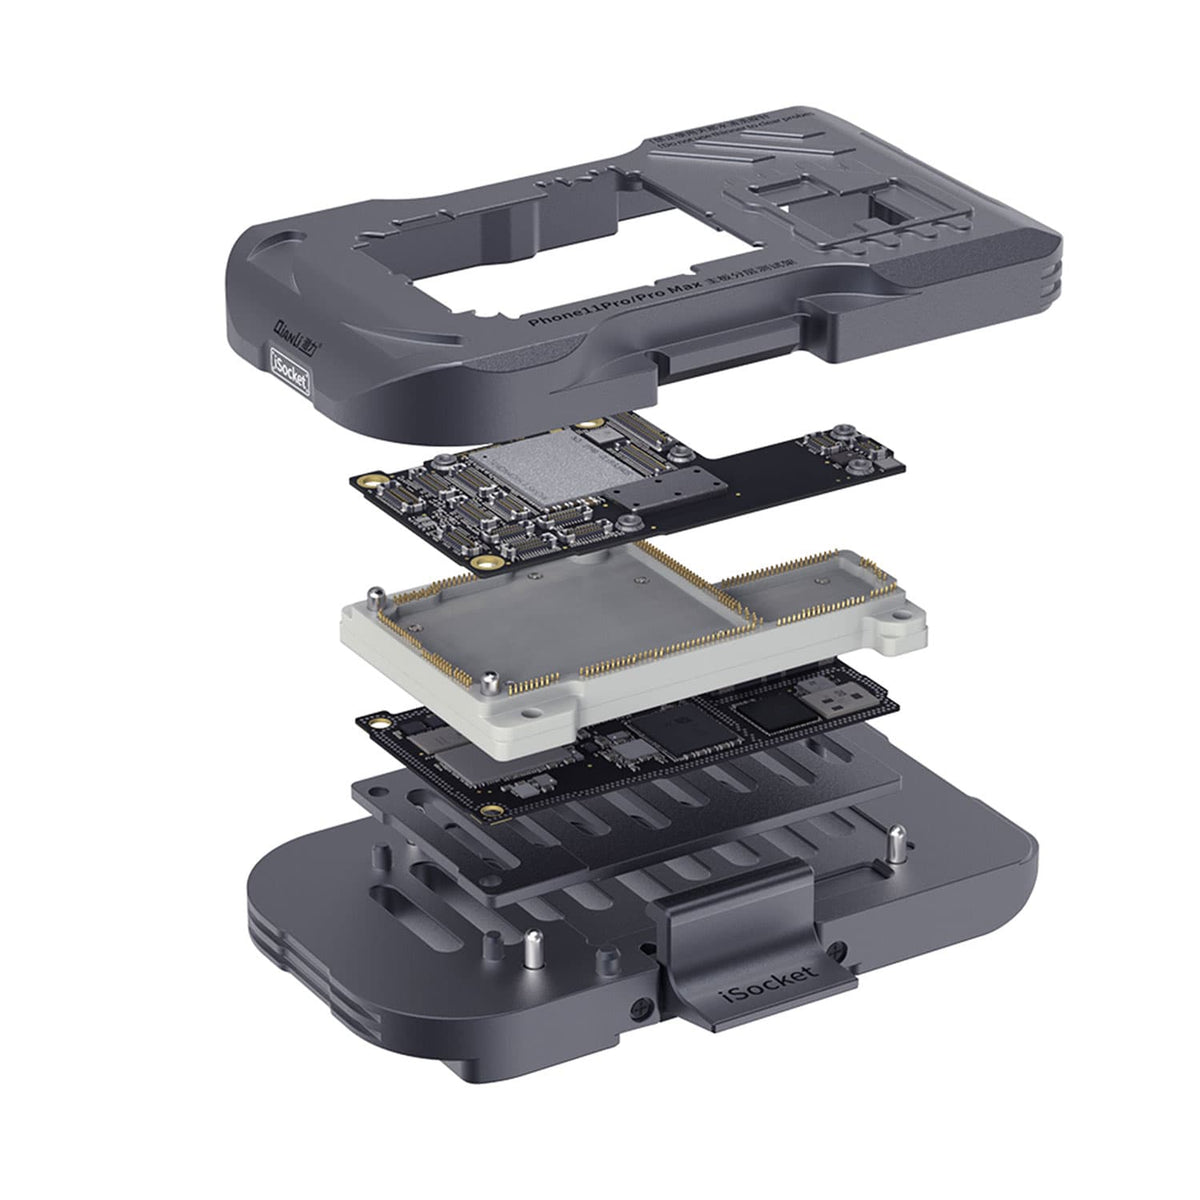 TOOLPLUS ISOCKET BOARD TEST FIXTURE FOR IPHONE 11 PRO/11 PRO MAX